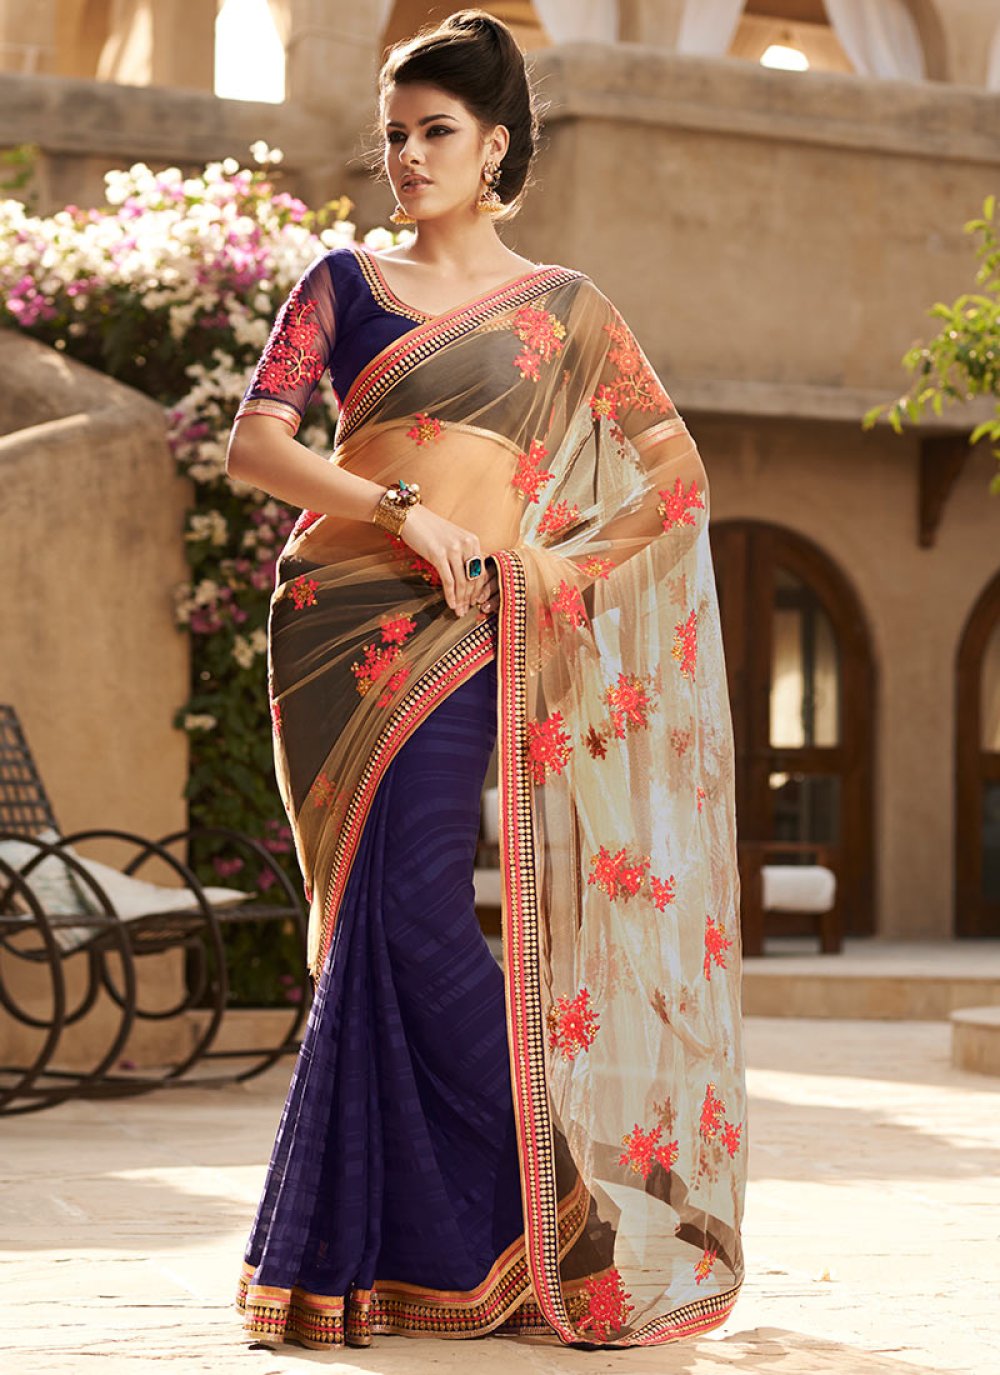 South Indian Style Traditional Half Saree For Women